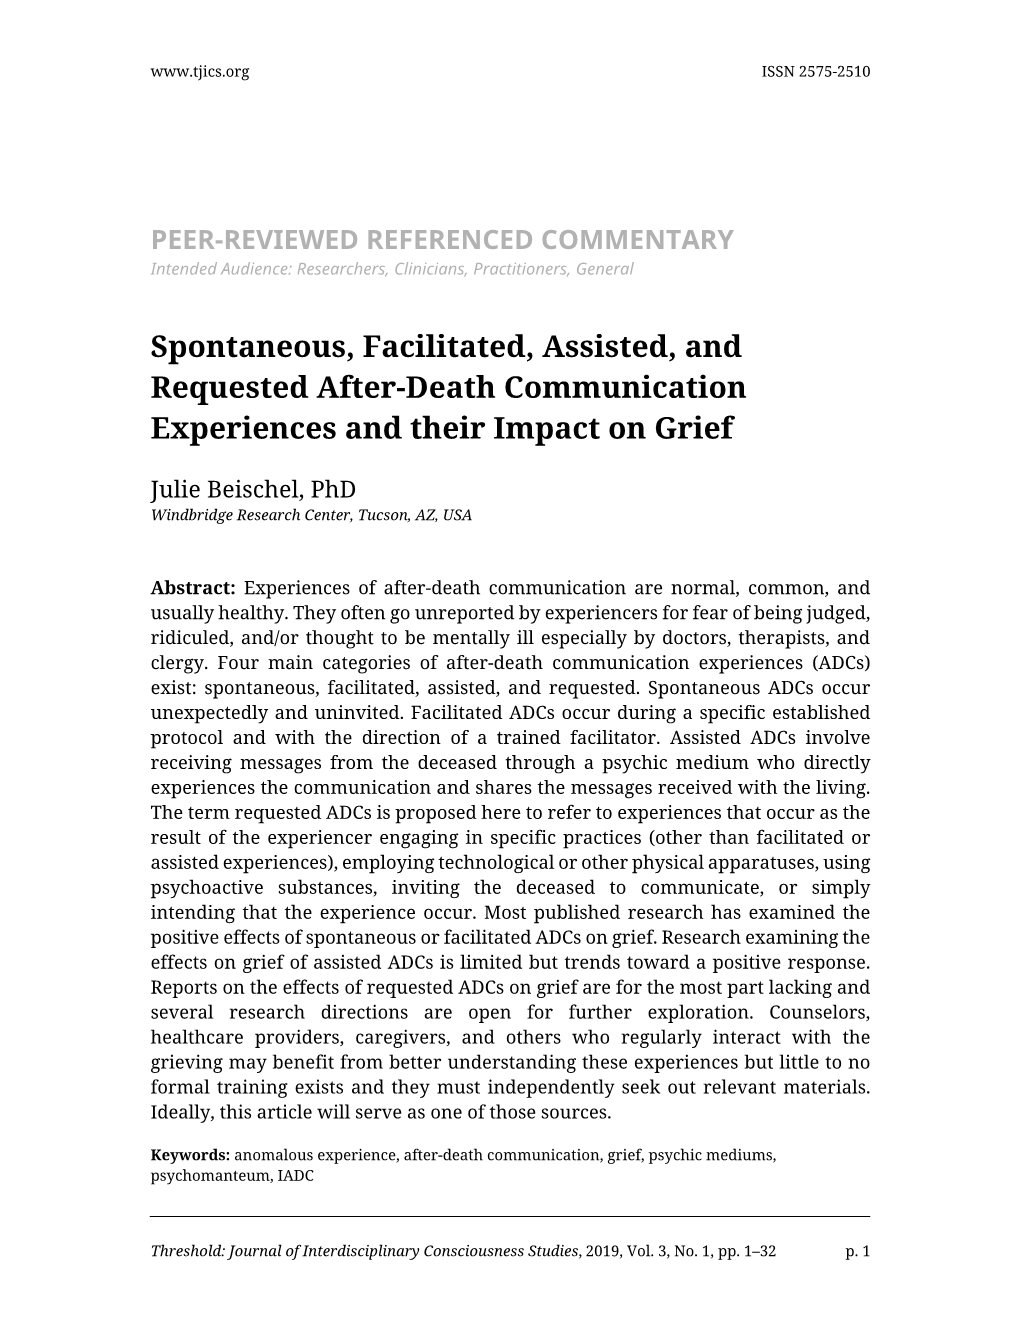 Spontaneous, Facilitated, Assisted, and Requested After-Death Communication Experiences and Their Impact on Grief